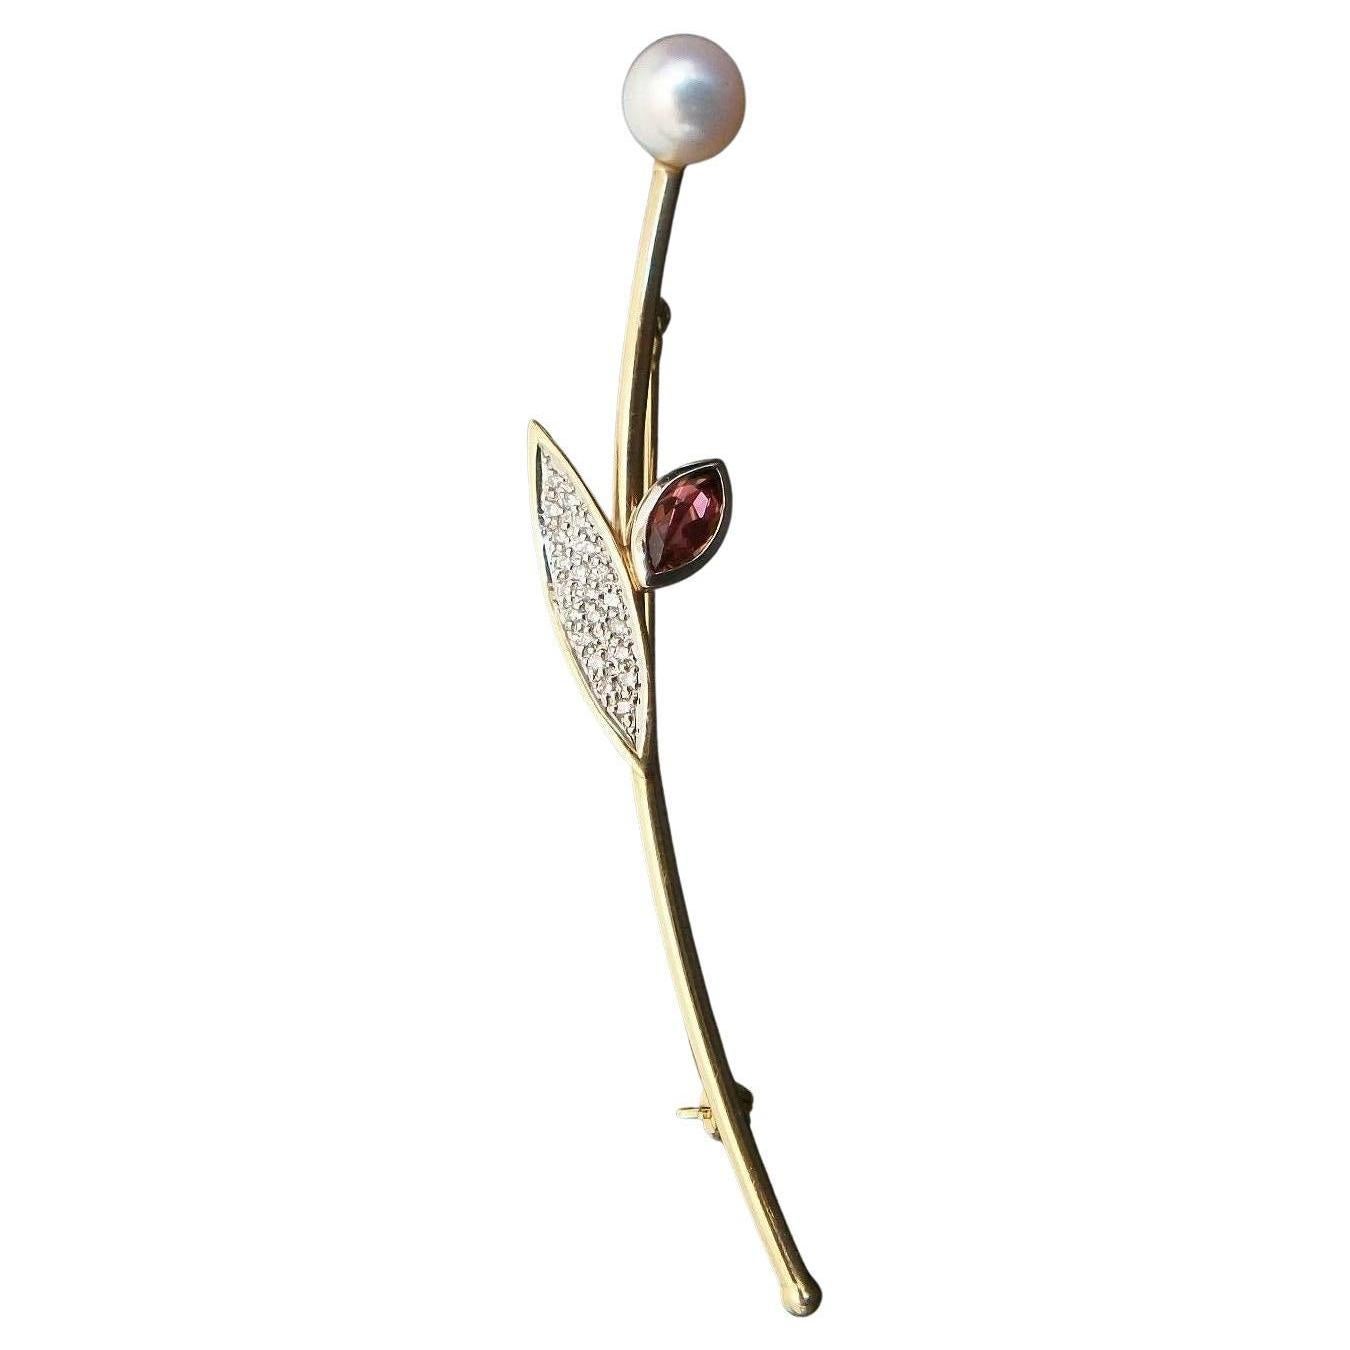 Modernist Pearl & Gem Set 14K Yellow Gold Flower Pin, Signed, Mid-20th Century